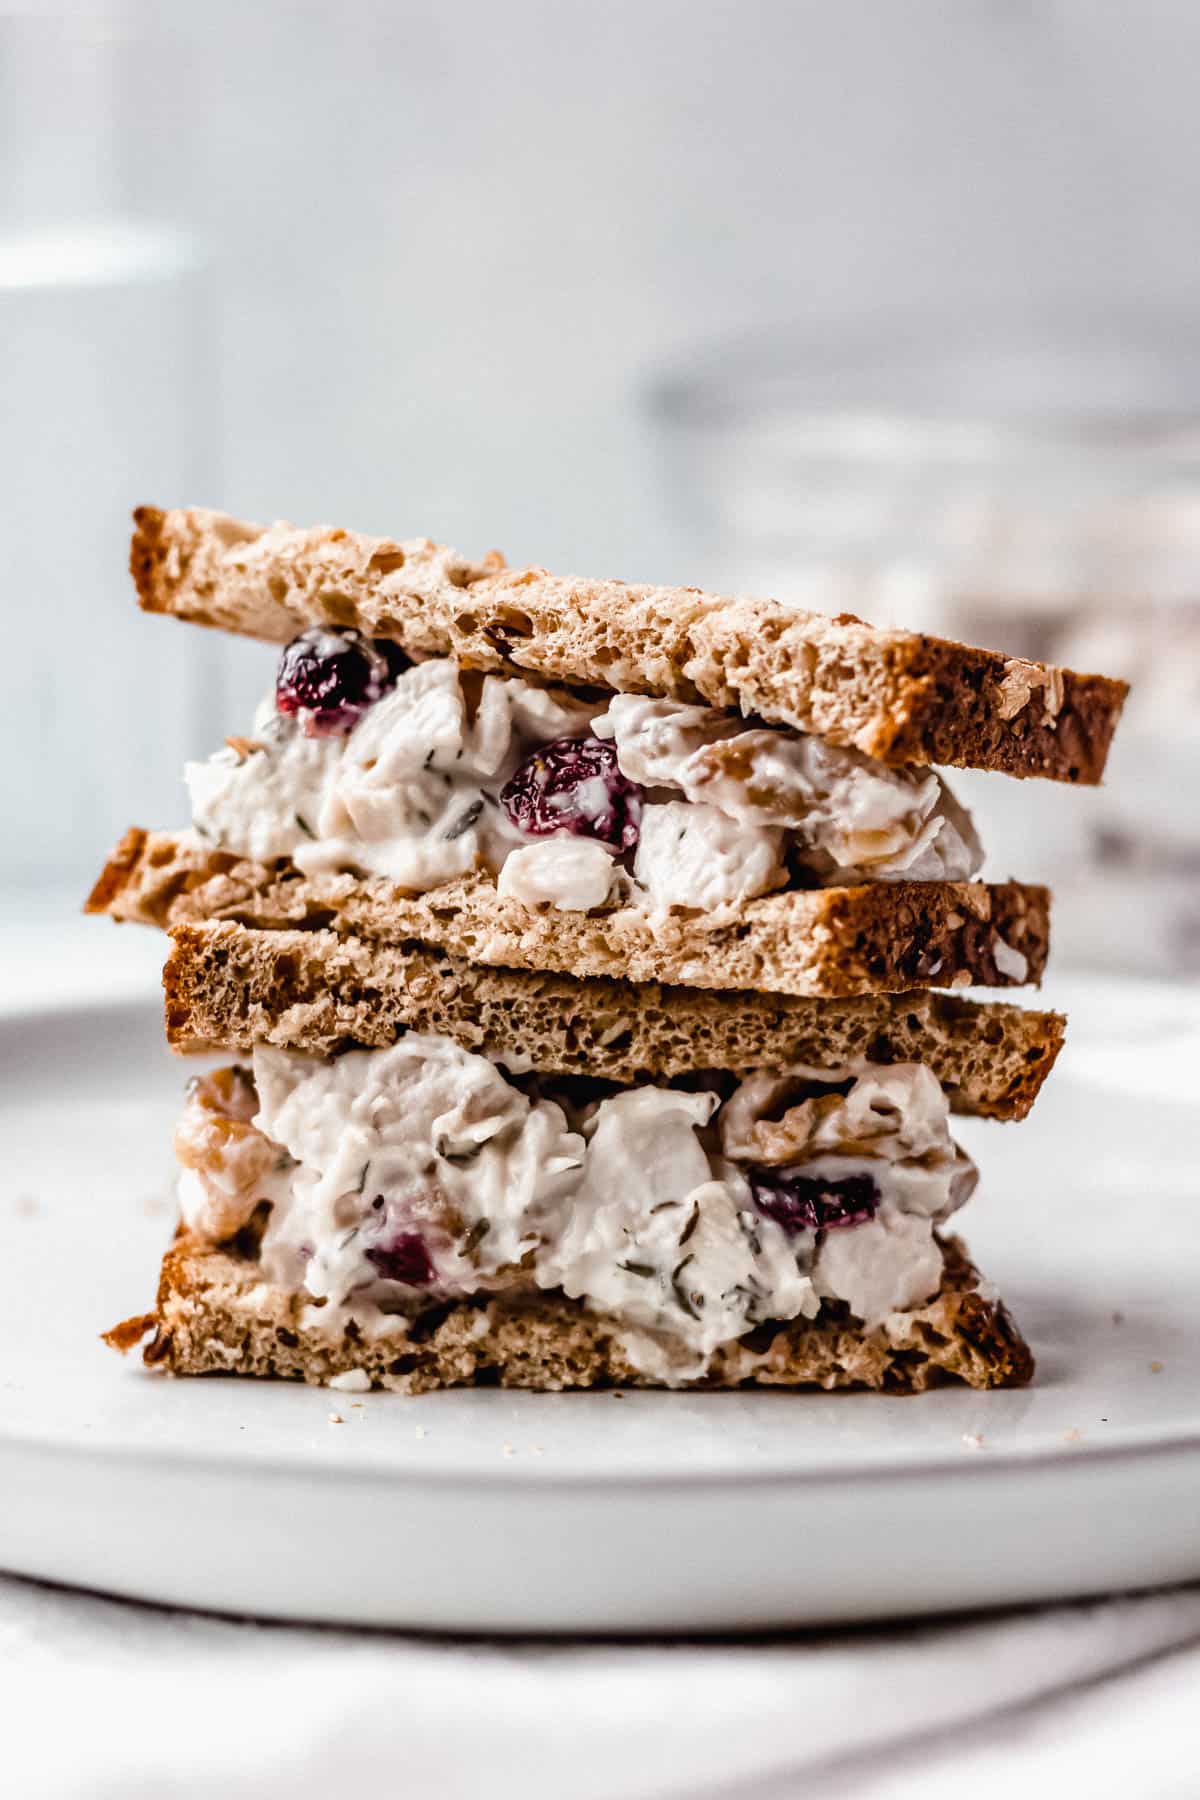 Cranberry Walnut chicken salad sandwich cut in half and stacked on top of each other on a white plate with a gray background